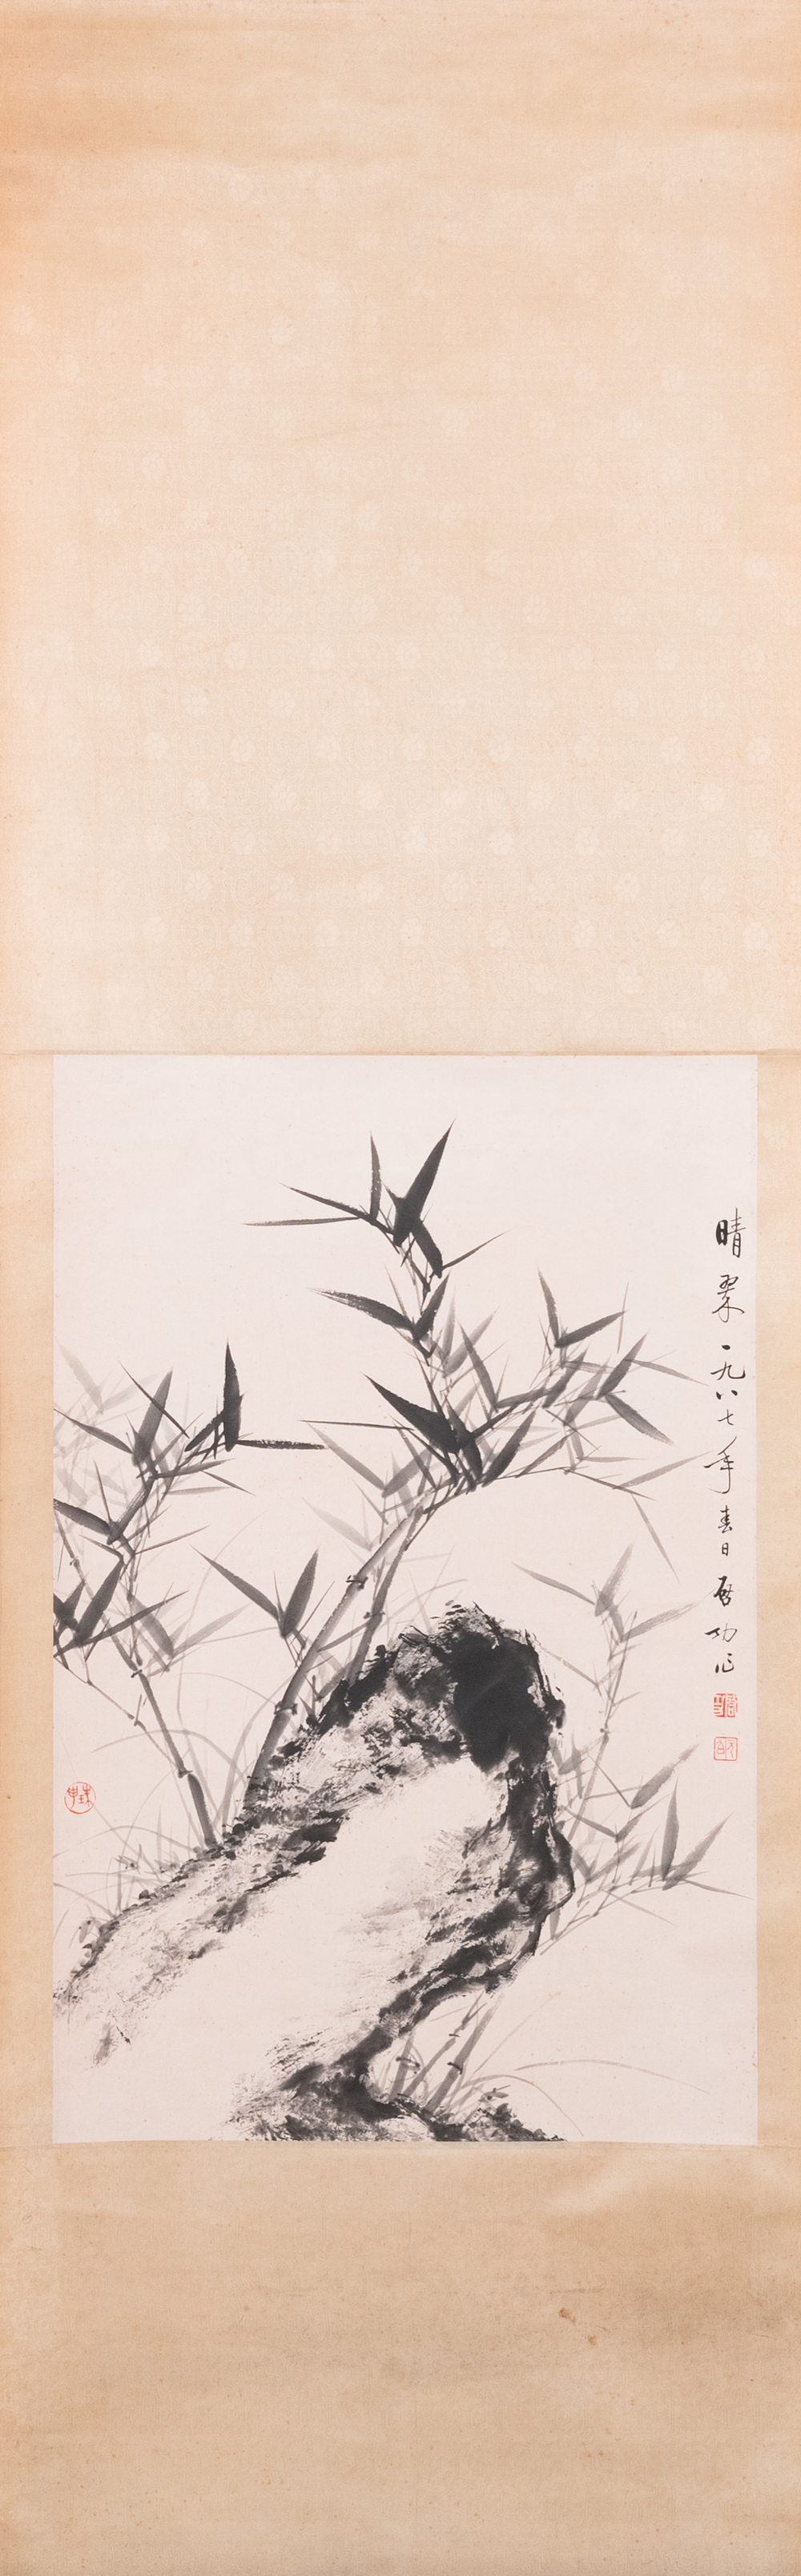 Attributed to Qi Gong 啟功 (1912-2005): 'Bamboo with rocks', ink on paper, dated 1967